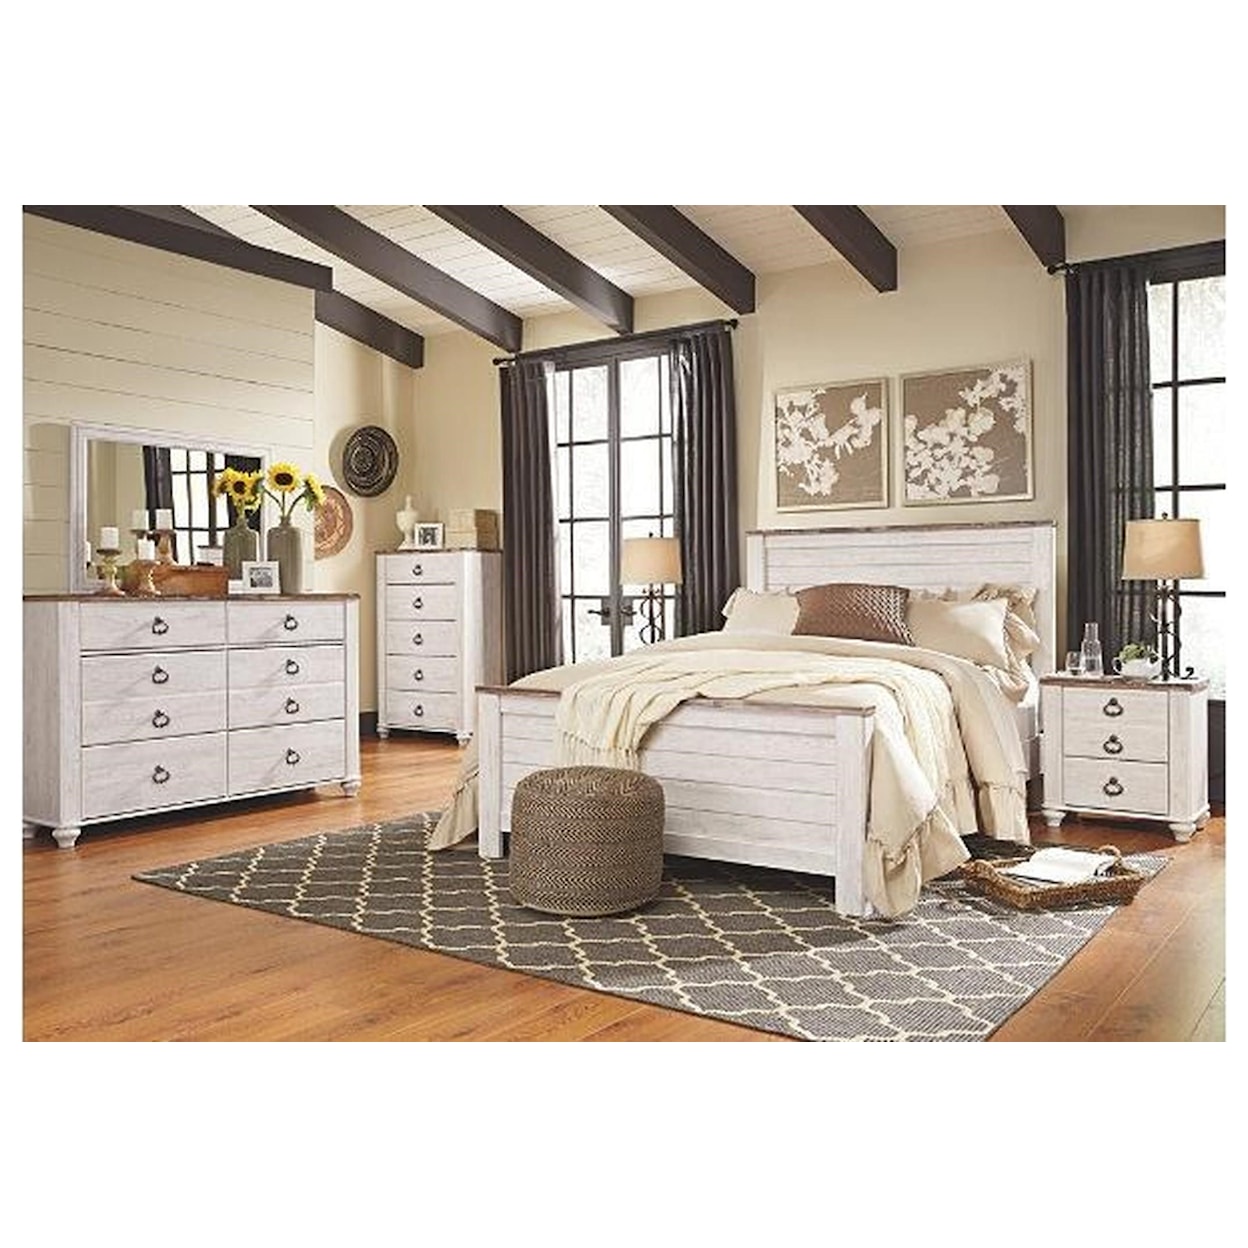 Signature Design by Ashley Willowton 8PC King bedroom group